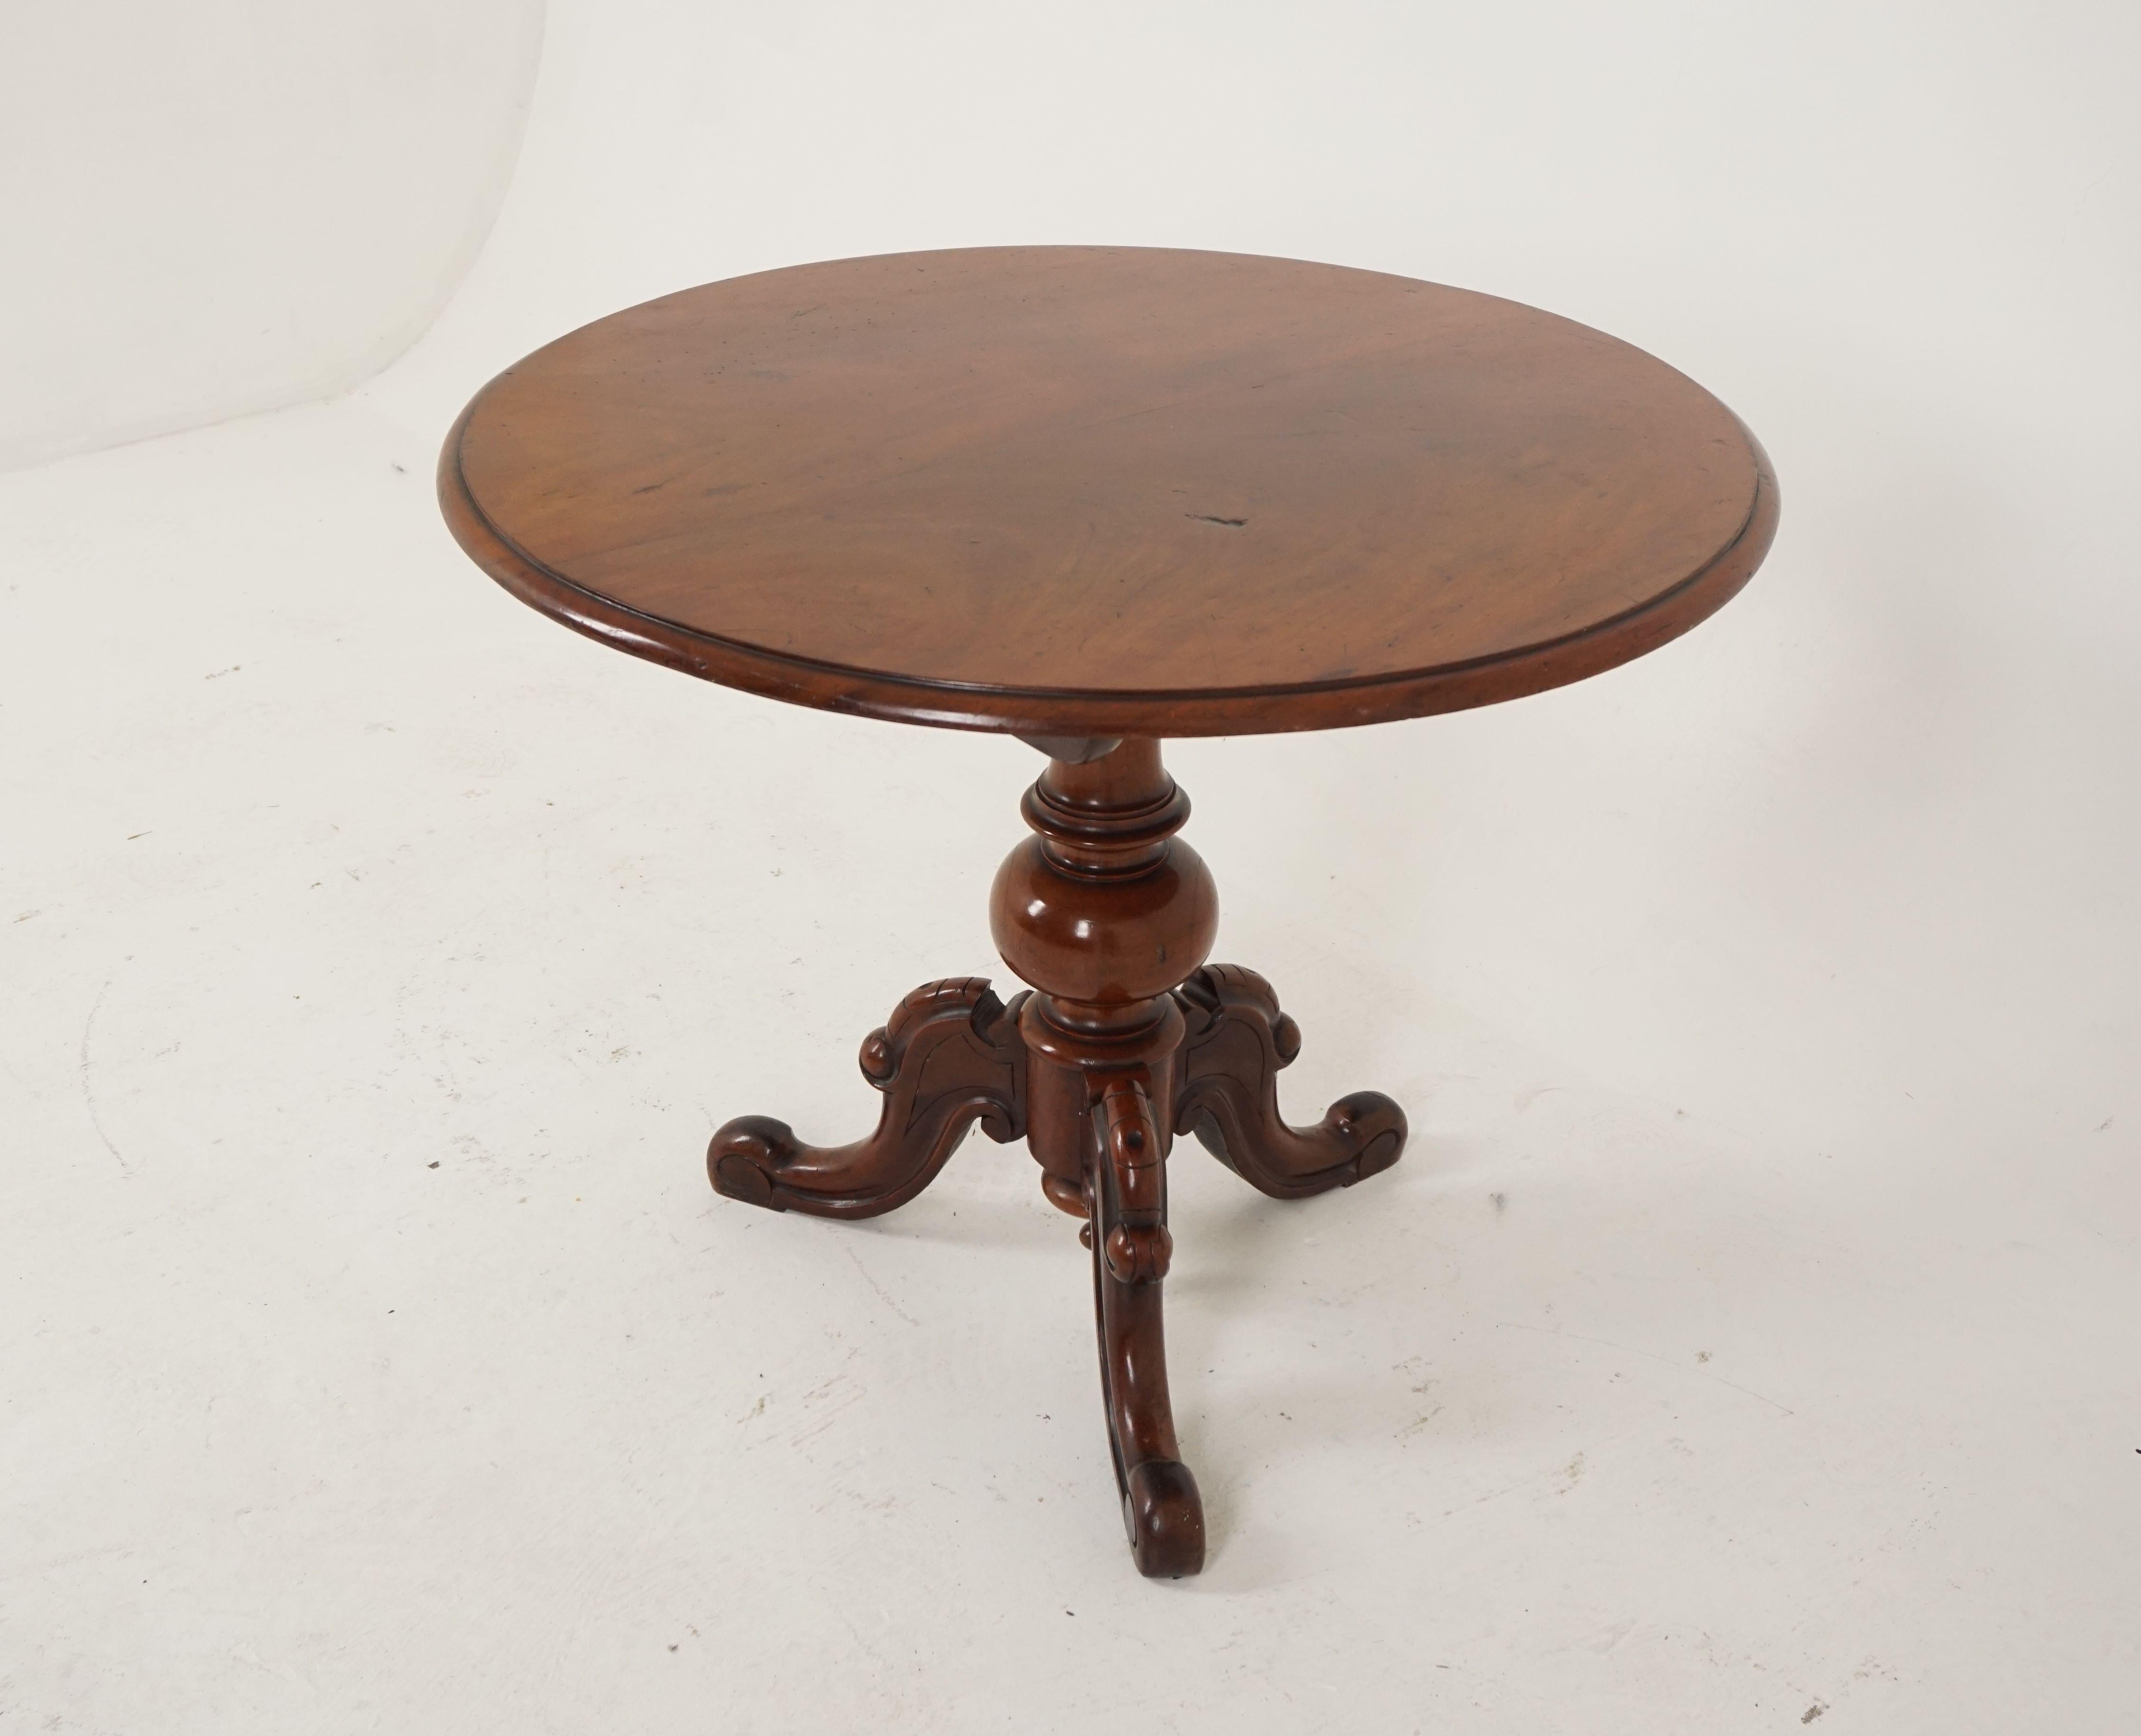 Hand-Crafted Antique Tilt-Top Table, Victorian Walnut Breakfast Table, Scotland 1880, B1915